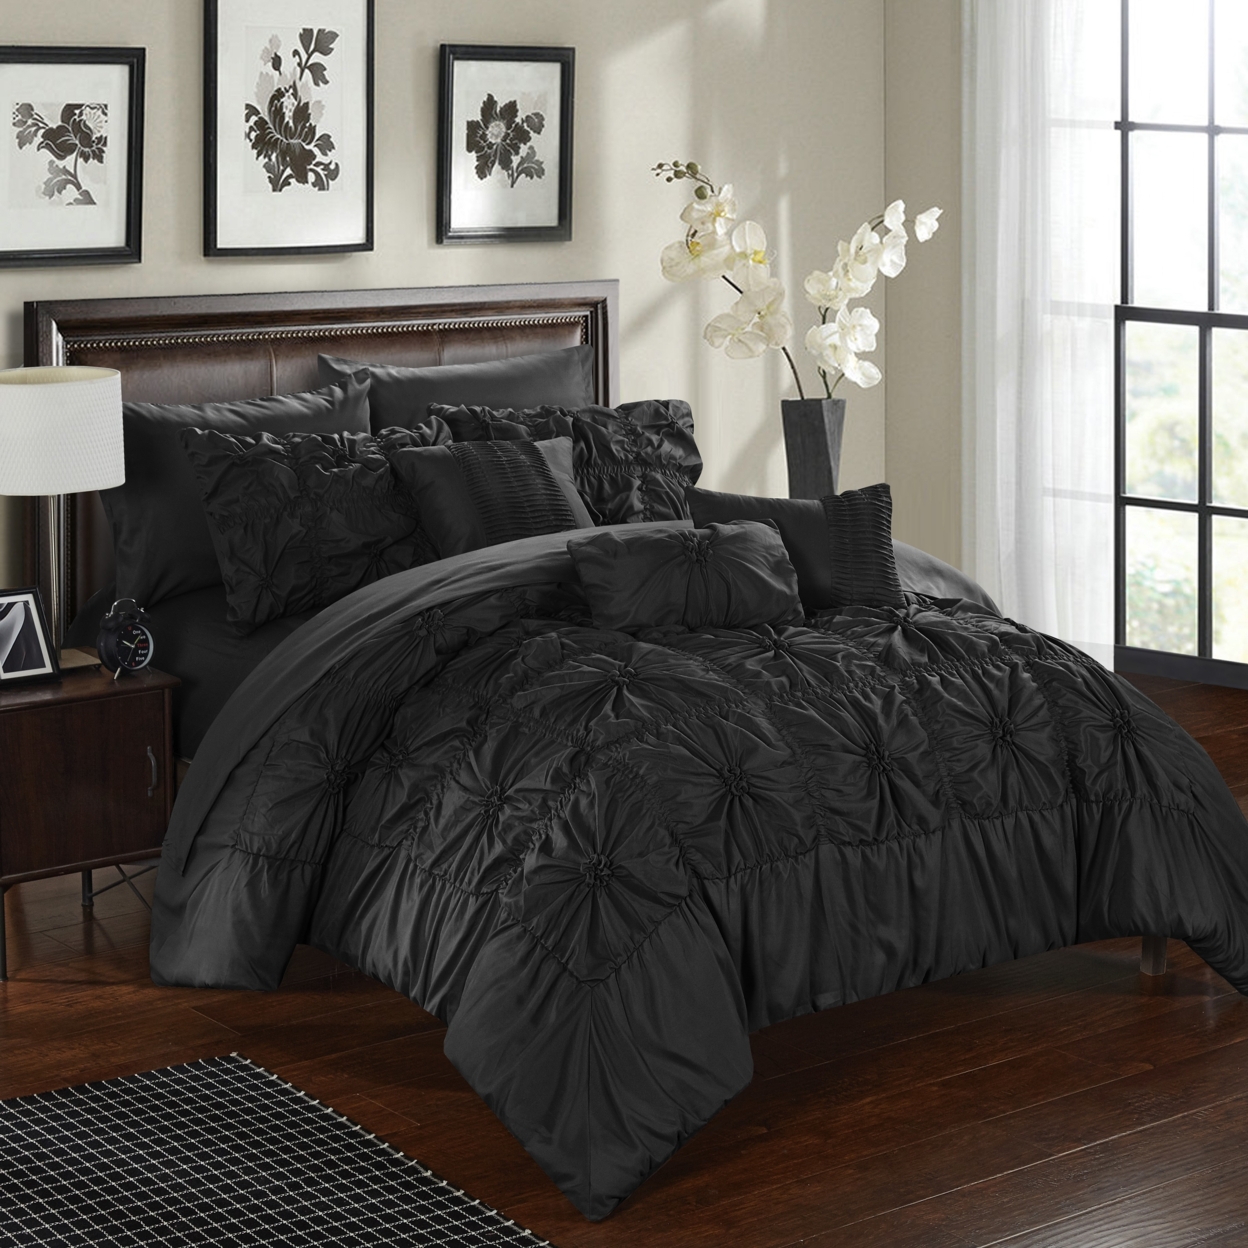 Chic Home 8/10 Piece Sheffield Floral Pinch Pleat Ruffled Designer Embellished Bed In A Bag Comforter Set With Sheet Set - Brick, Queen